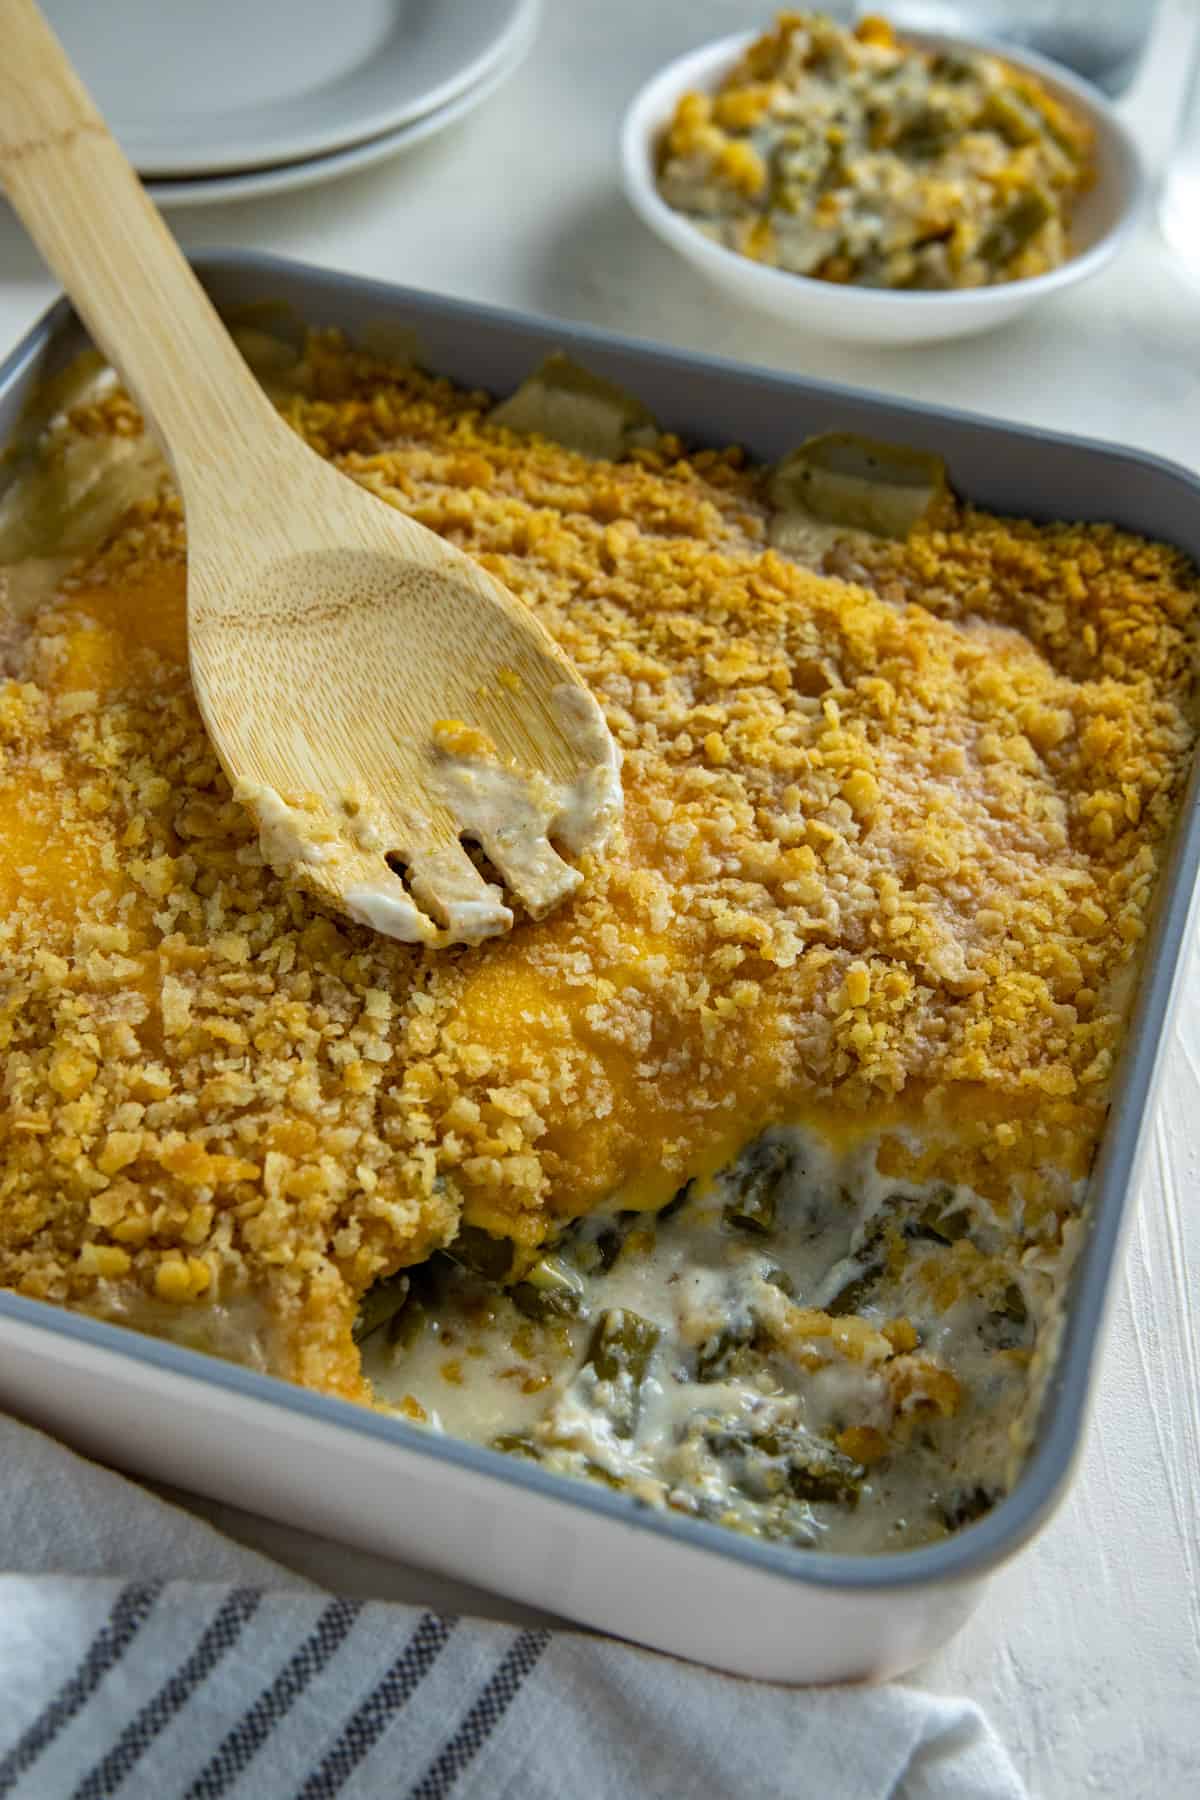 Cooked green bean casserole in square casserole dish with one serving removed.  A wooden serving spoon is resting on top of the casserole.